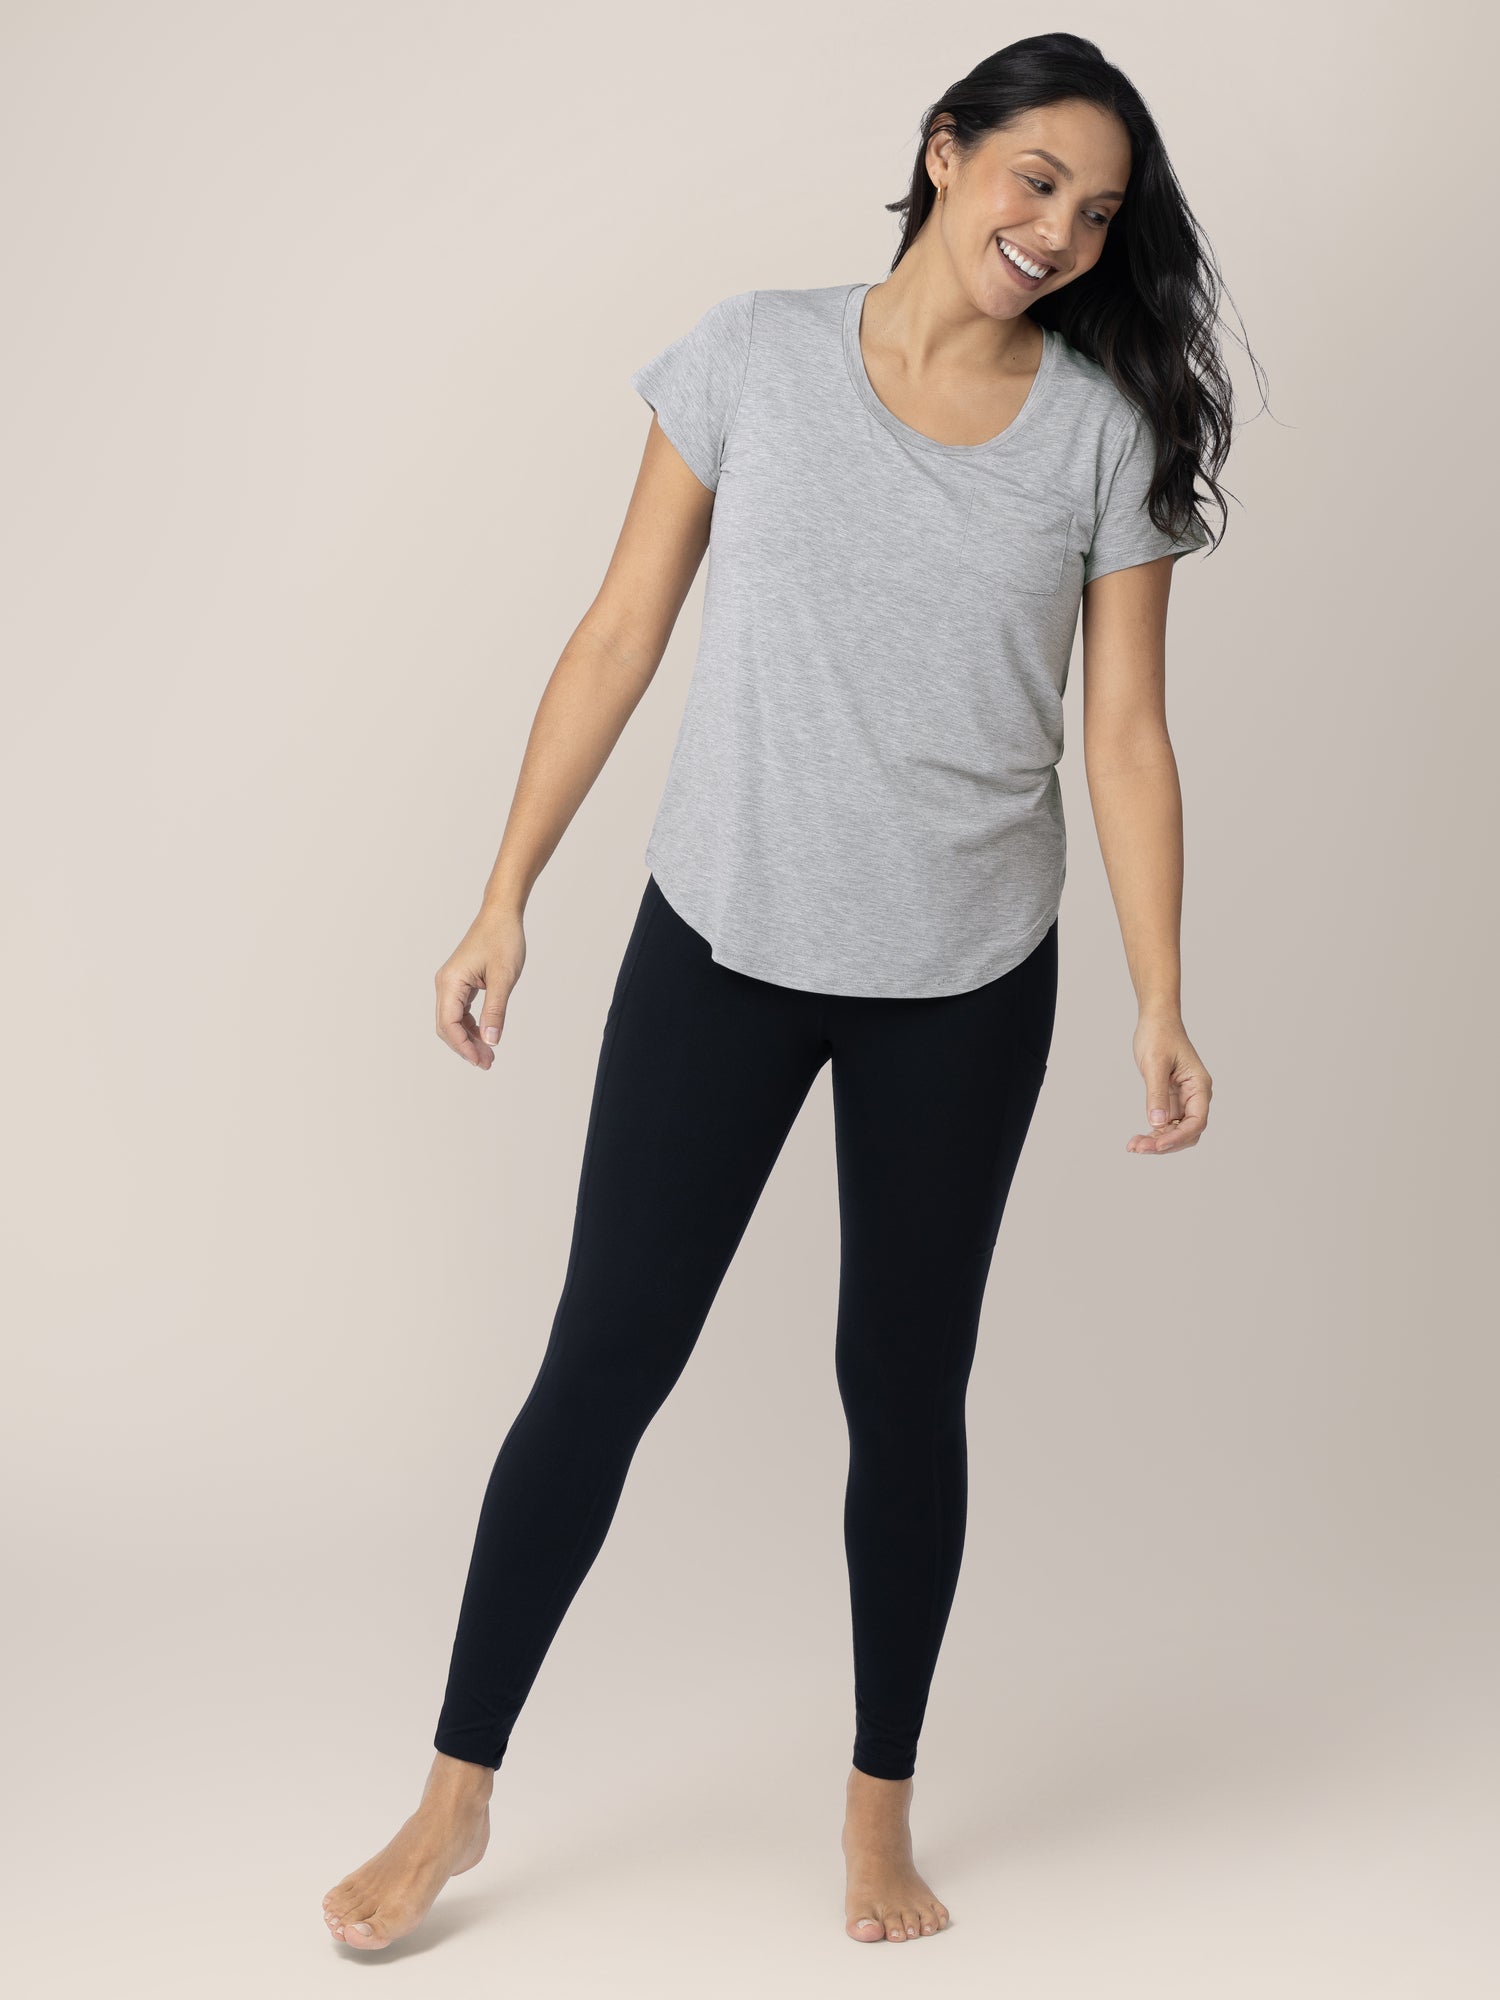 Model leaning more to one side while wearing the Everyday Maternity & Nursing T-shirt in Grey Heather